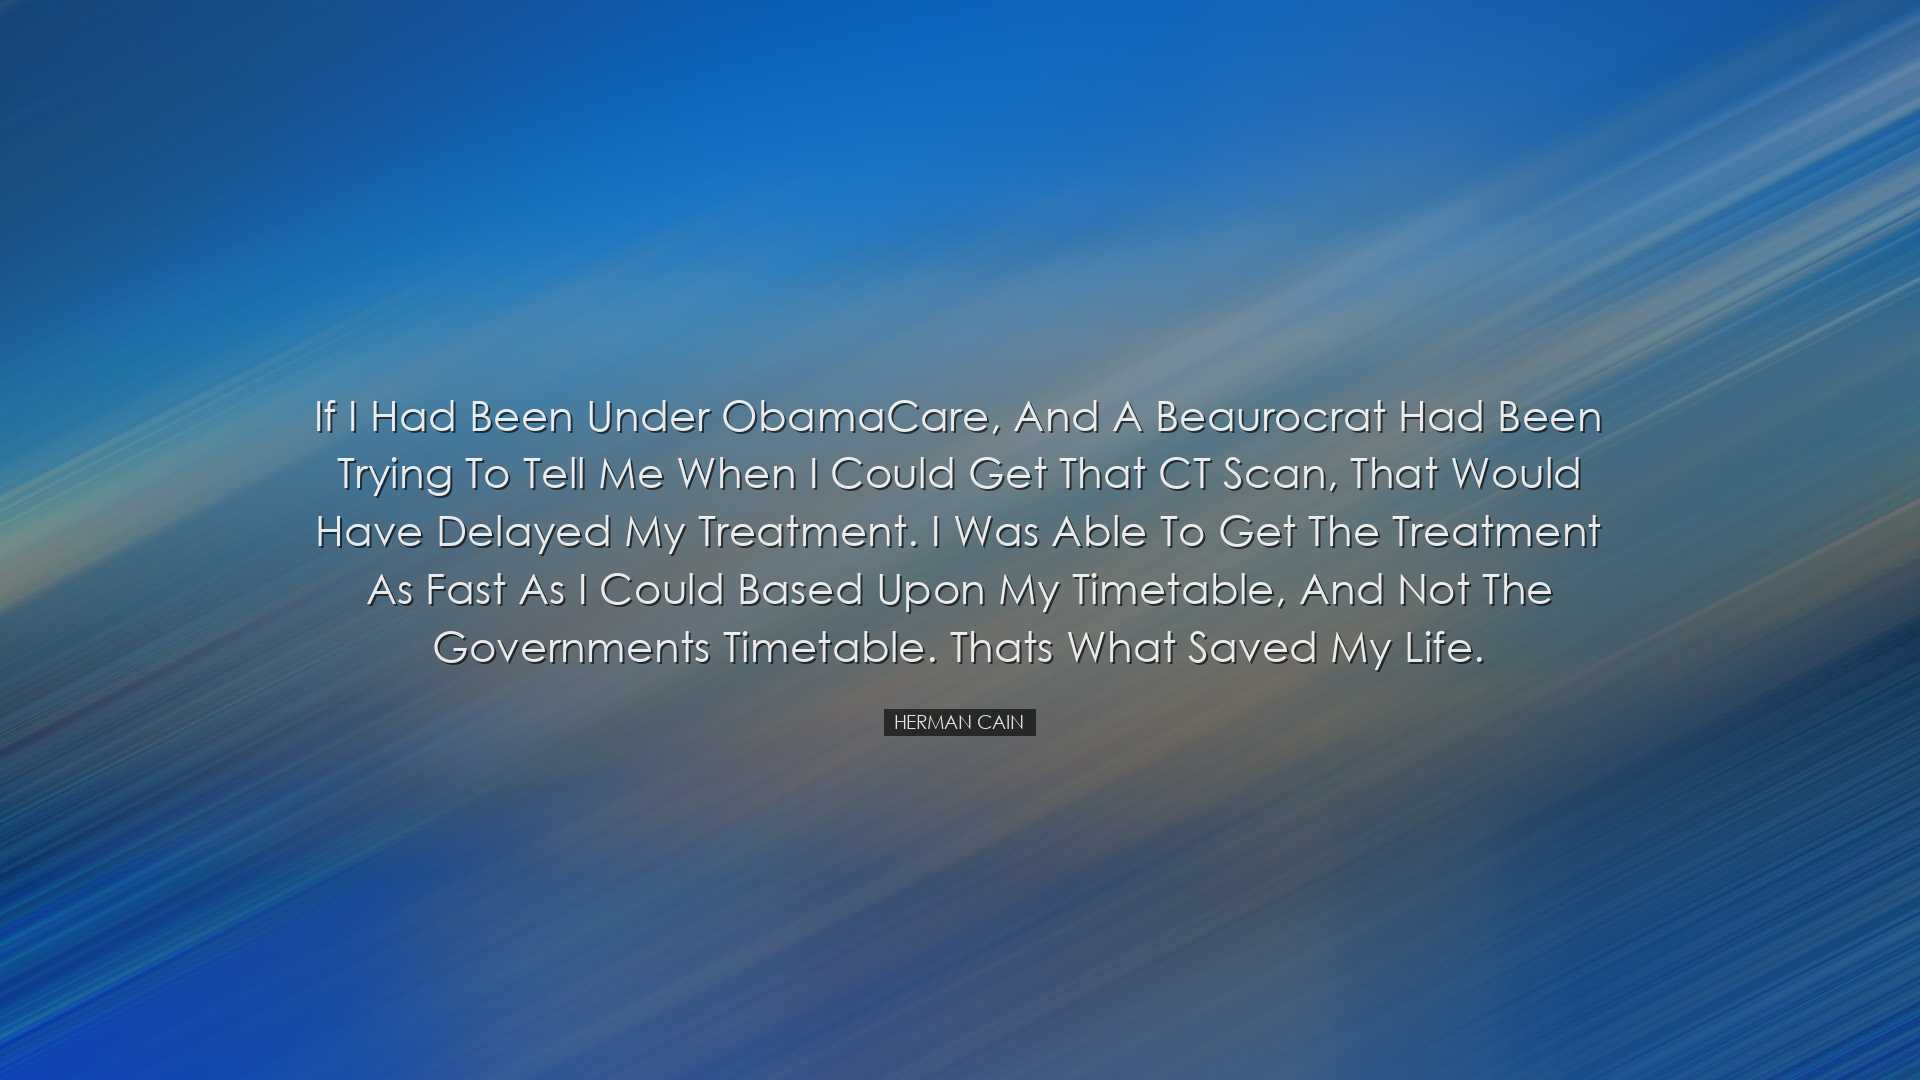 If I had been under ObamaCare, and a beaurocrat had been trying to